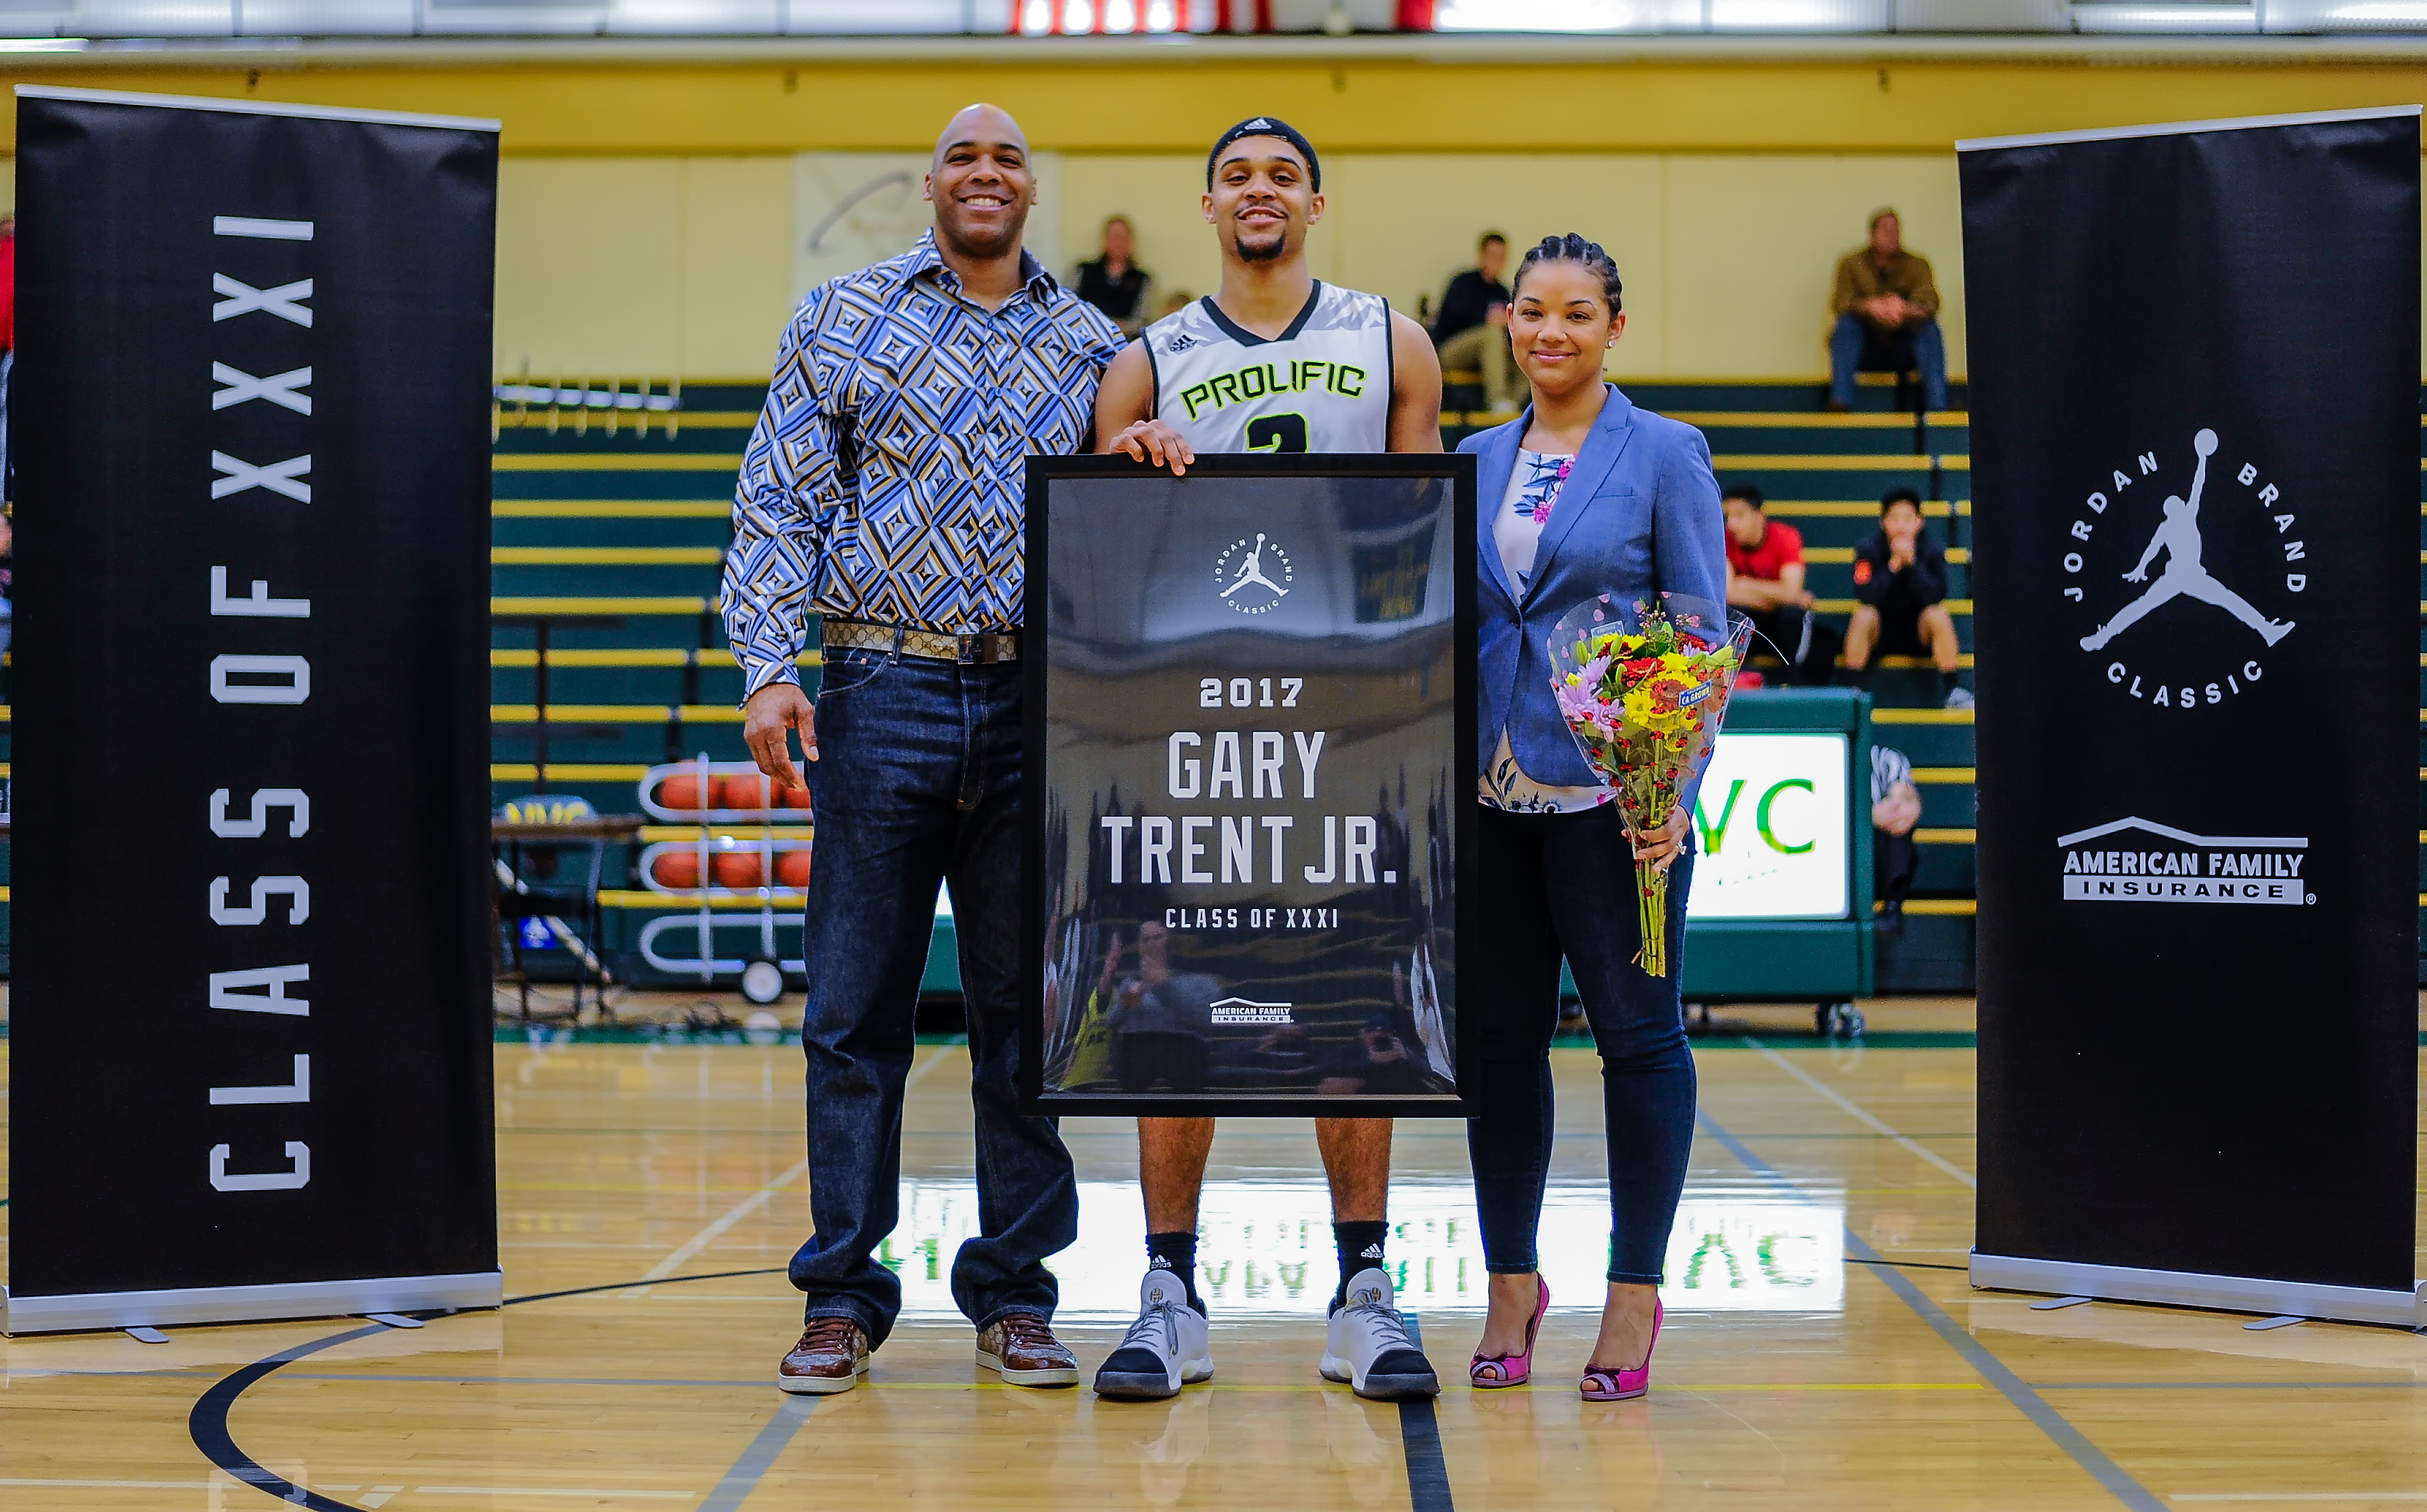 Gary Trent Jr. presented his mom and dad, Natalia and Gary Sr., with the Dream Champion Award. (Photo: Position Sports)